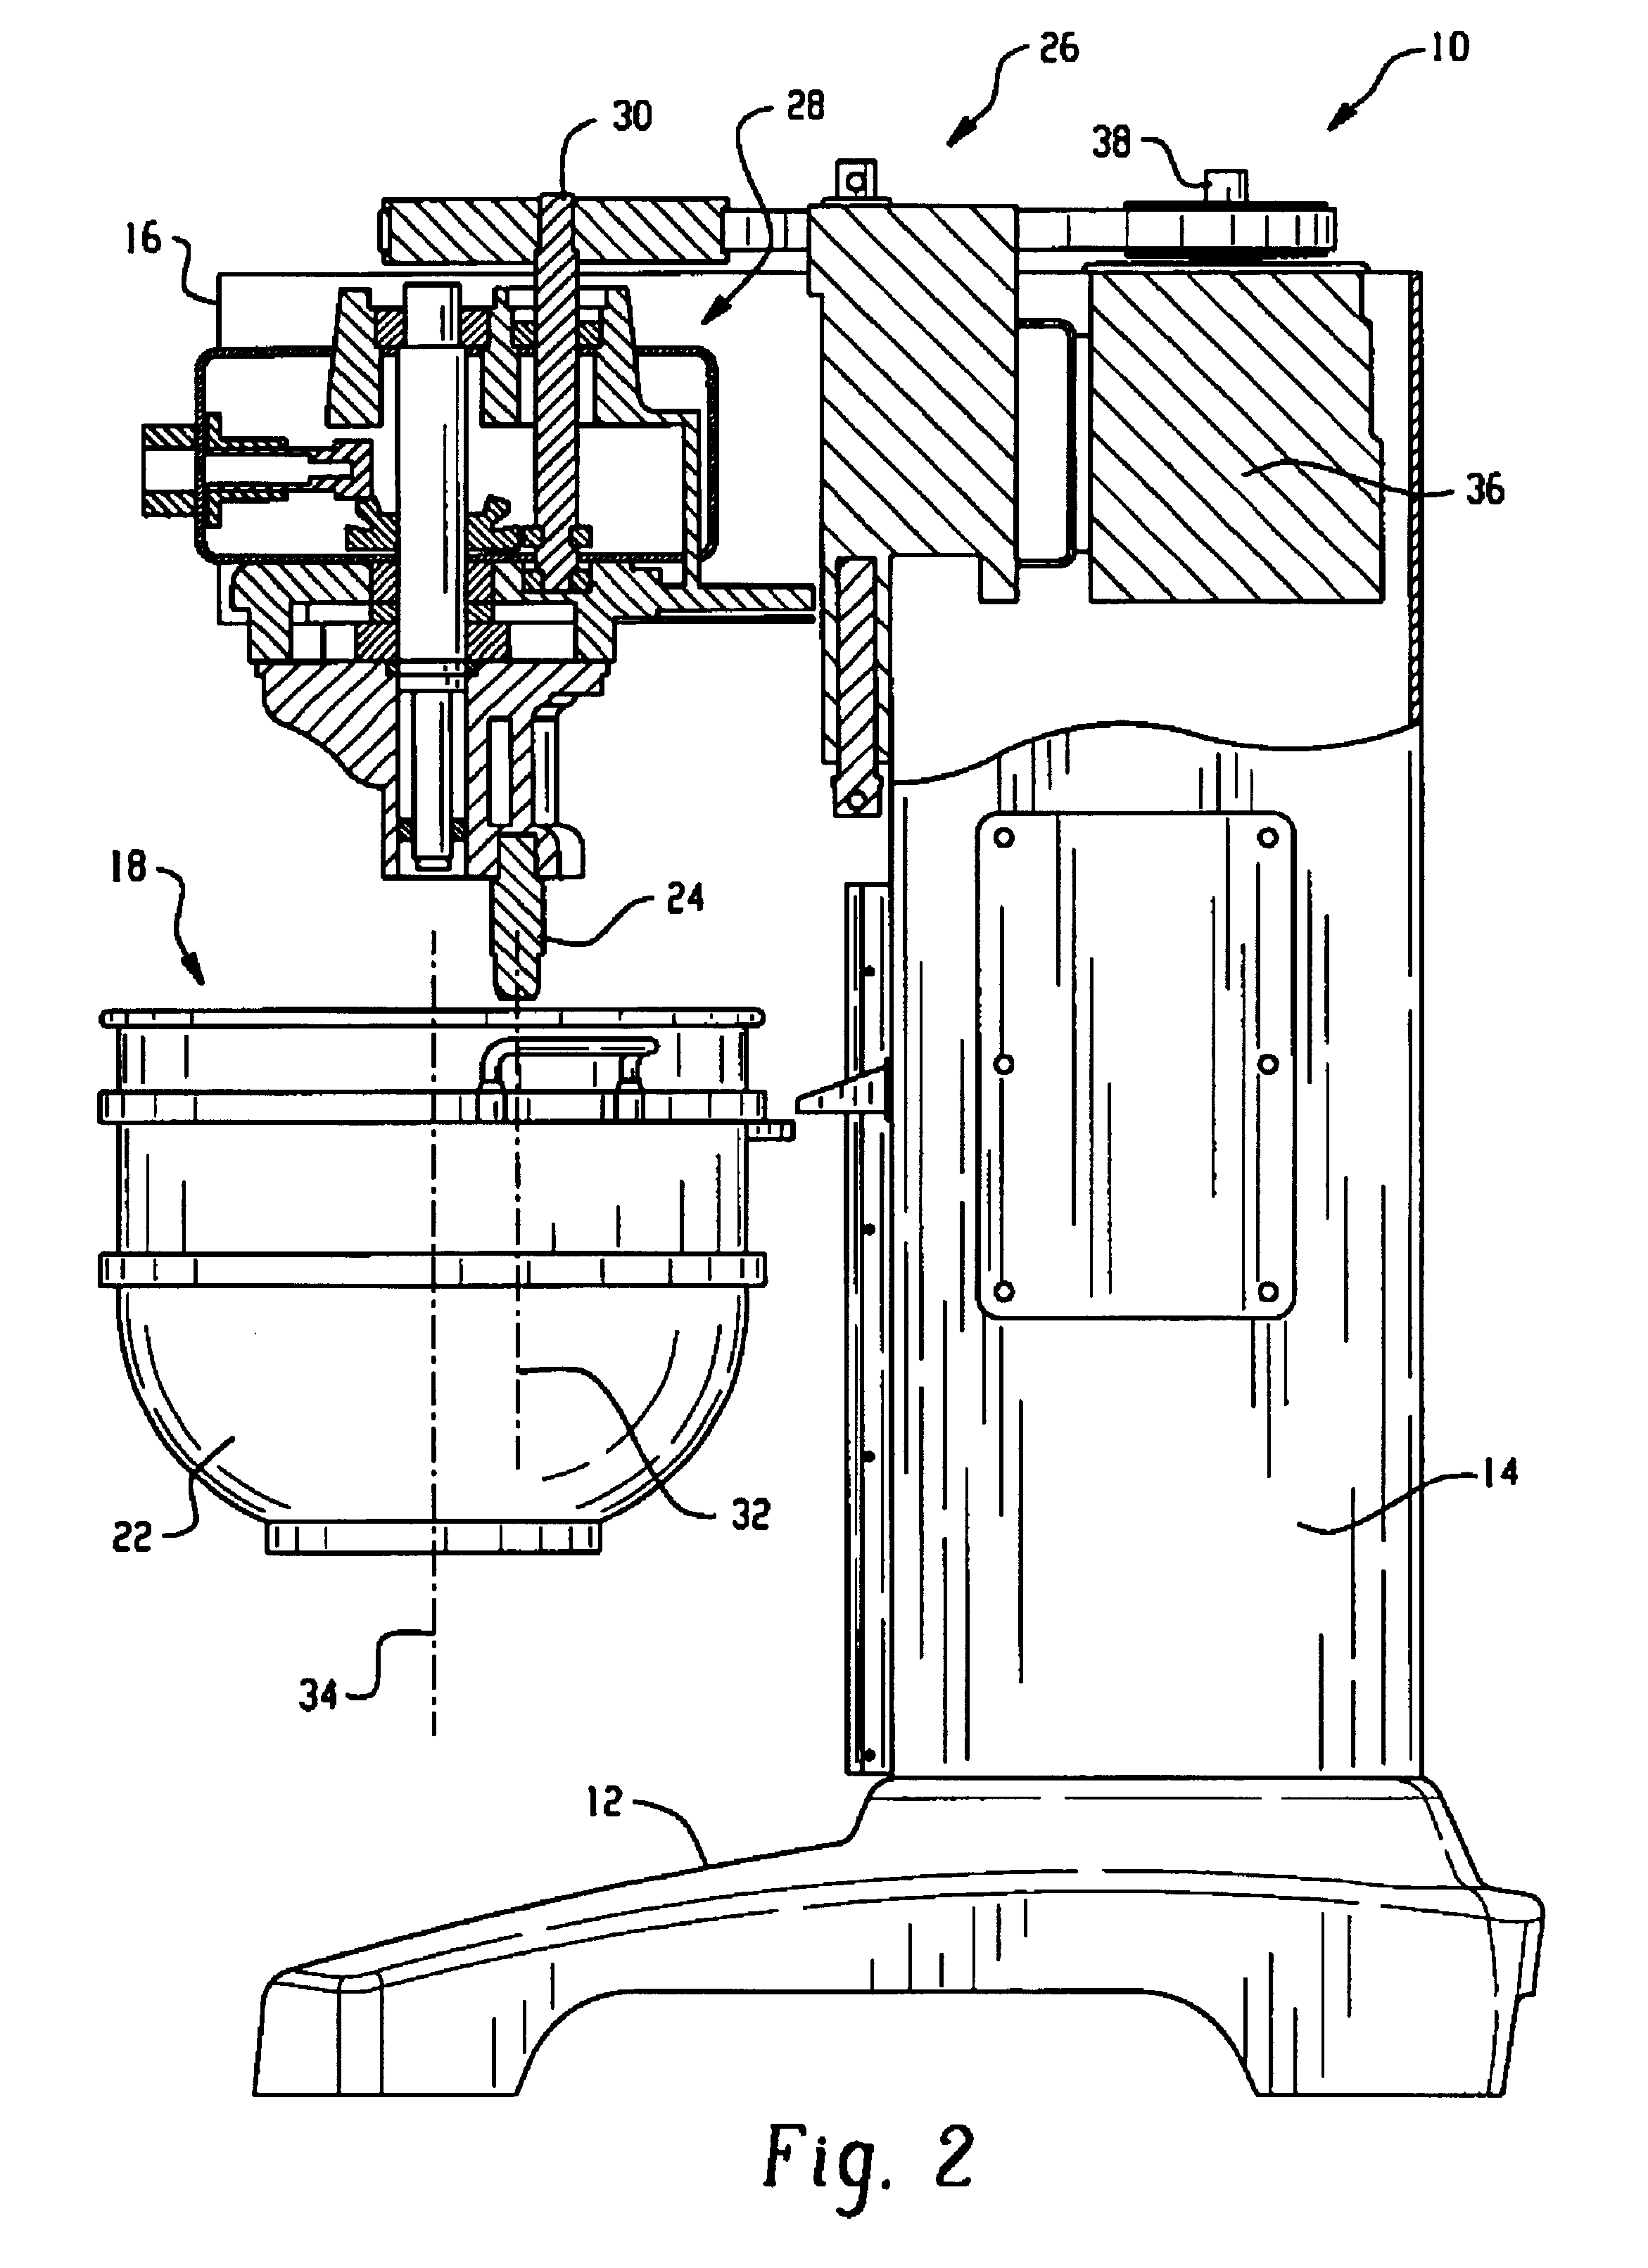 Bowl scraper and related attachment system for mixing machine